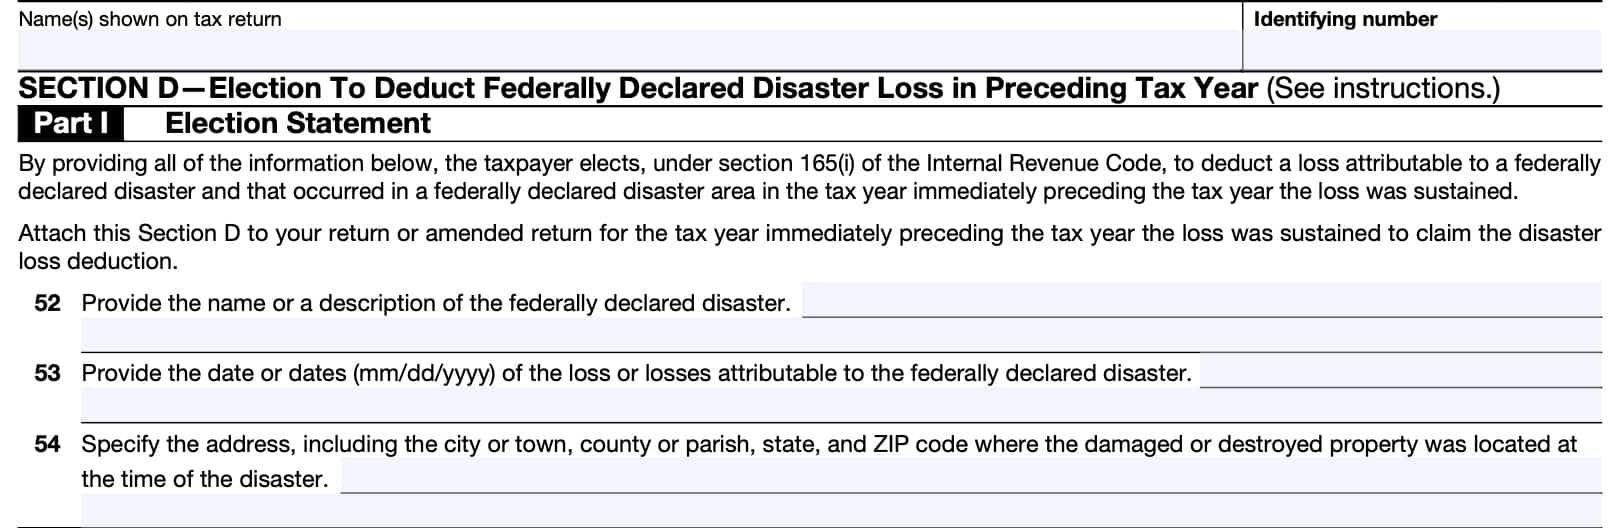 irs form 4684, section d-election to deduct federally declared disaster loss in preceding tax year, part i: election statement